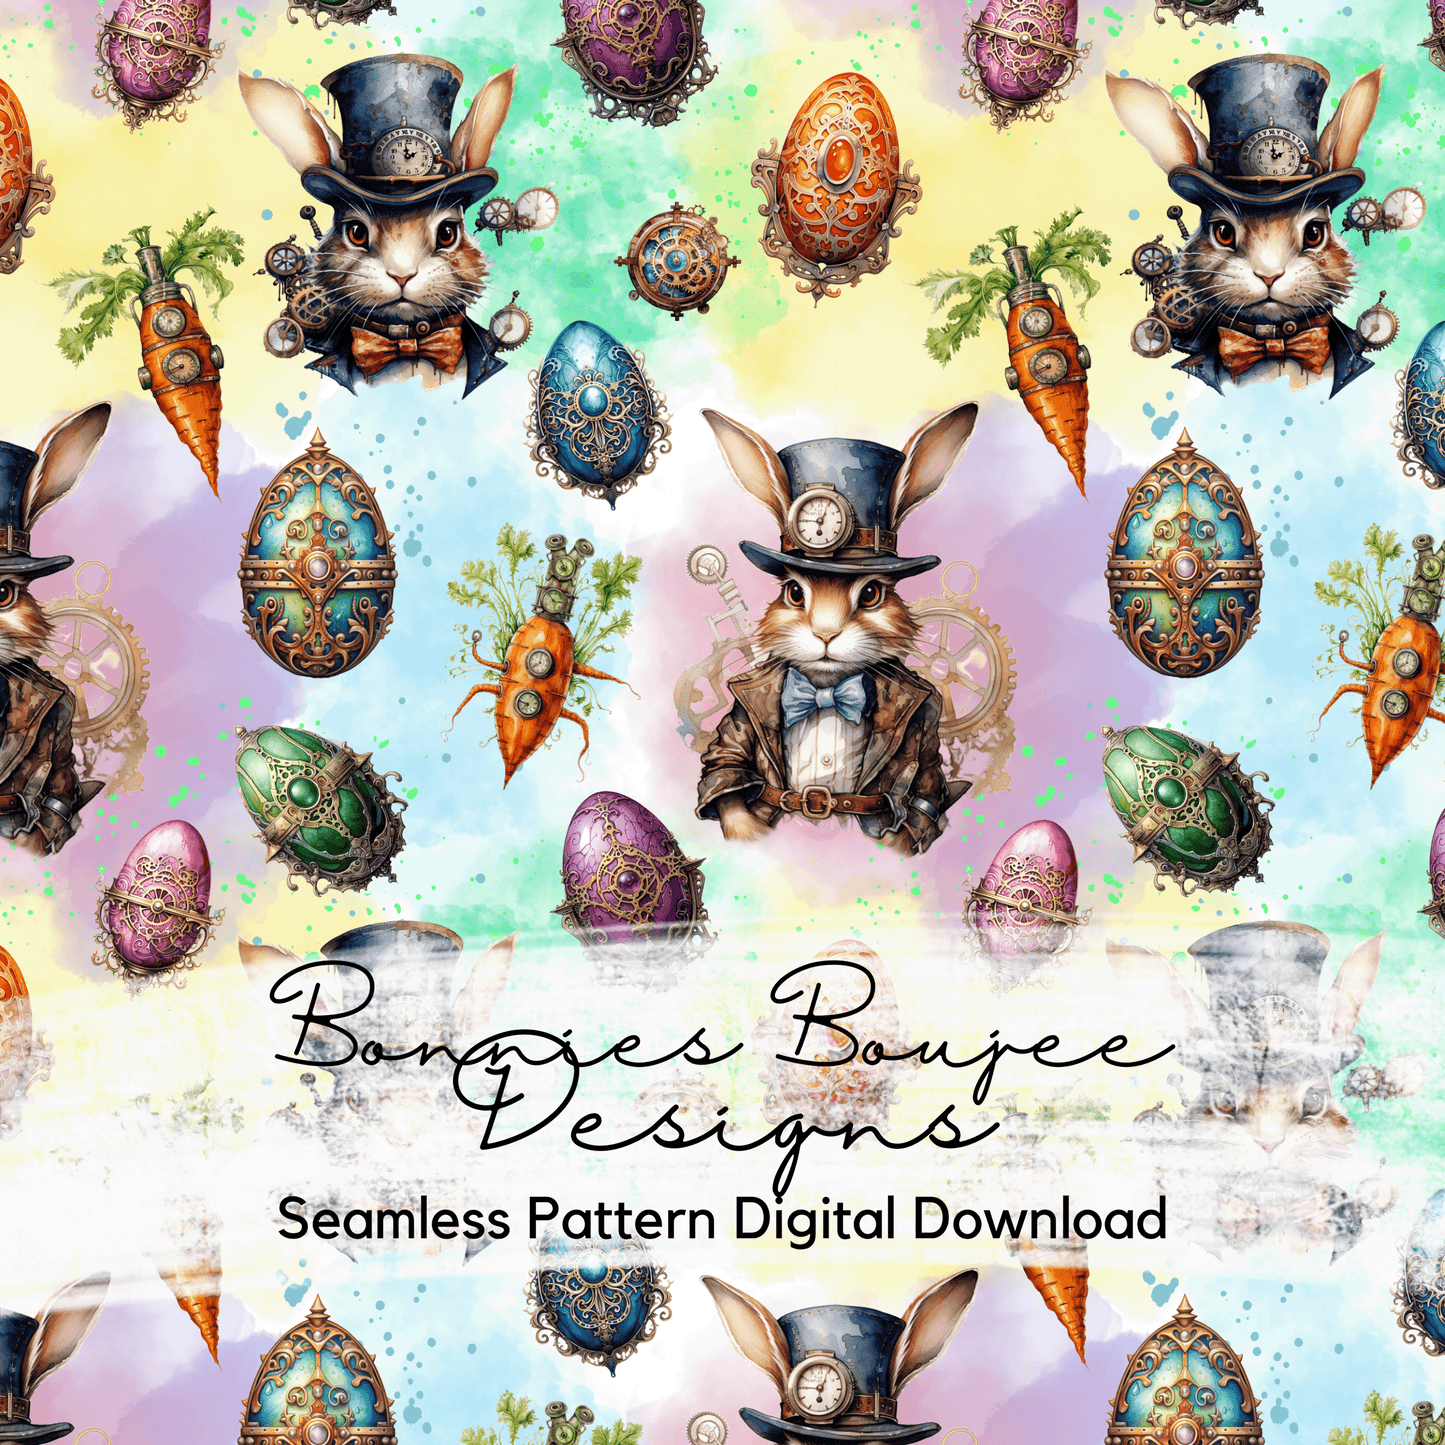 Steampunk Easter Bunny Bundle Purchase